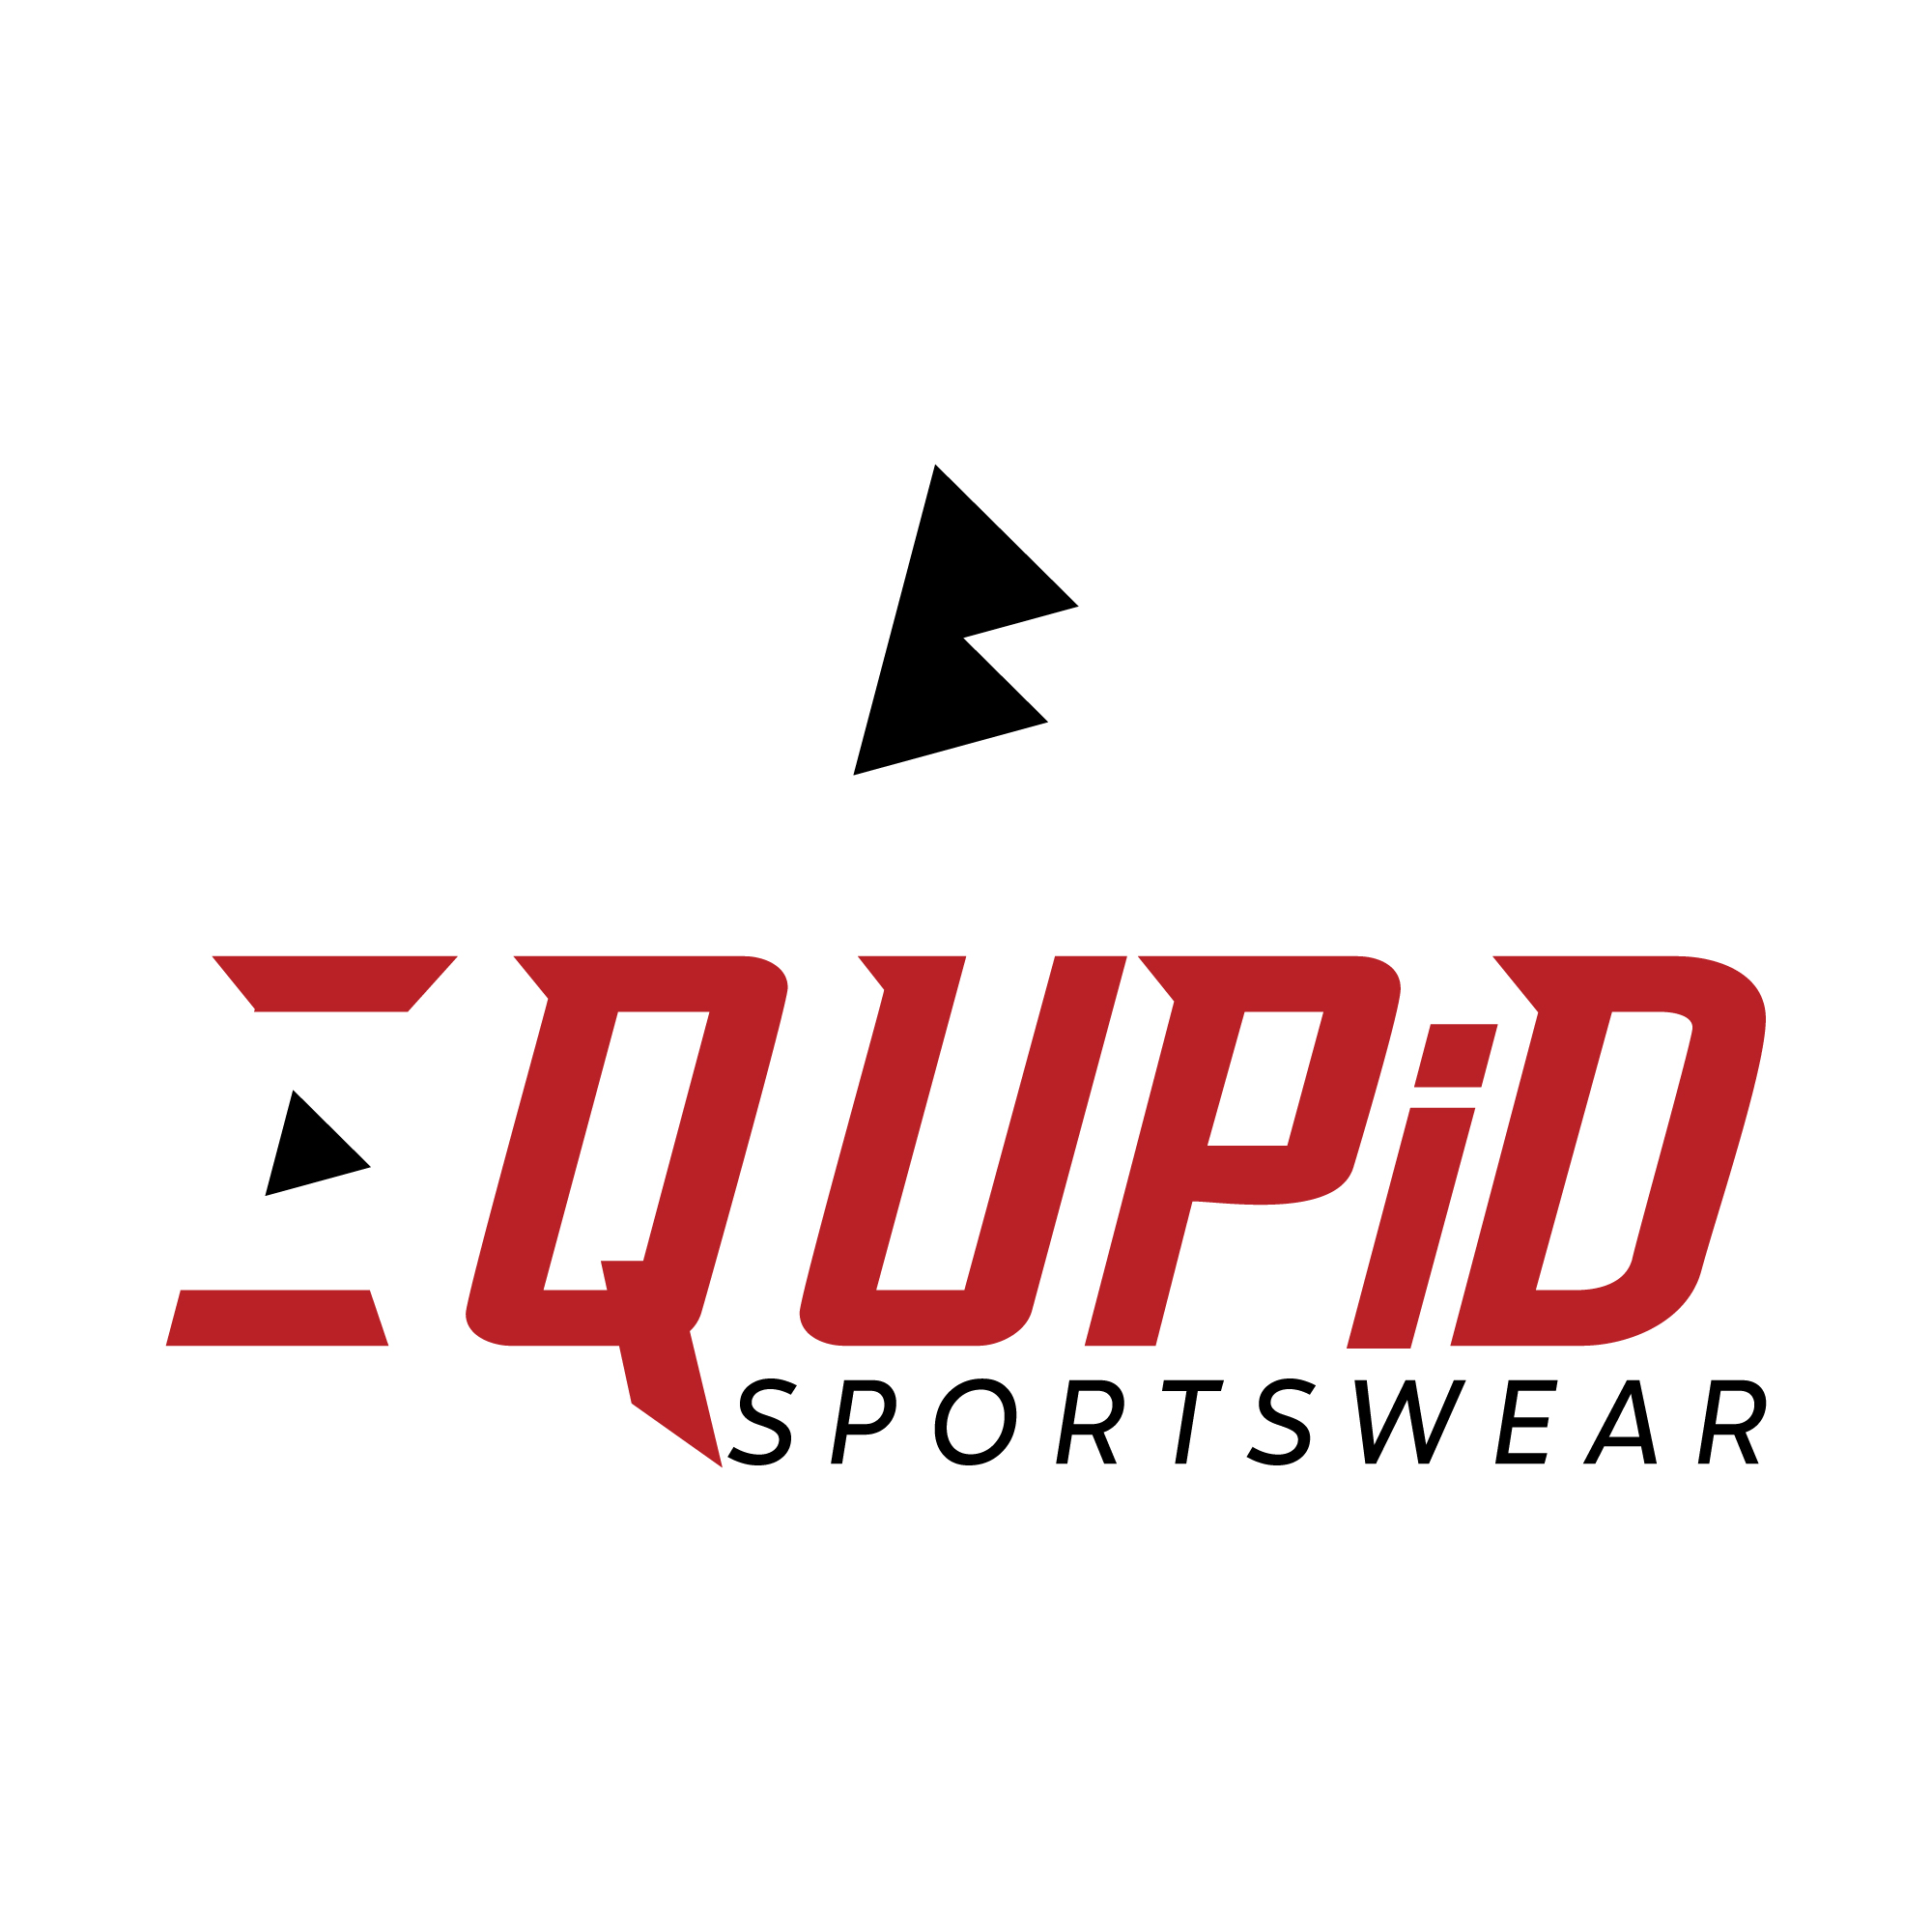 Red and black logo for a sportswear company.